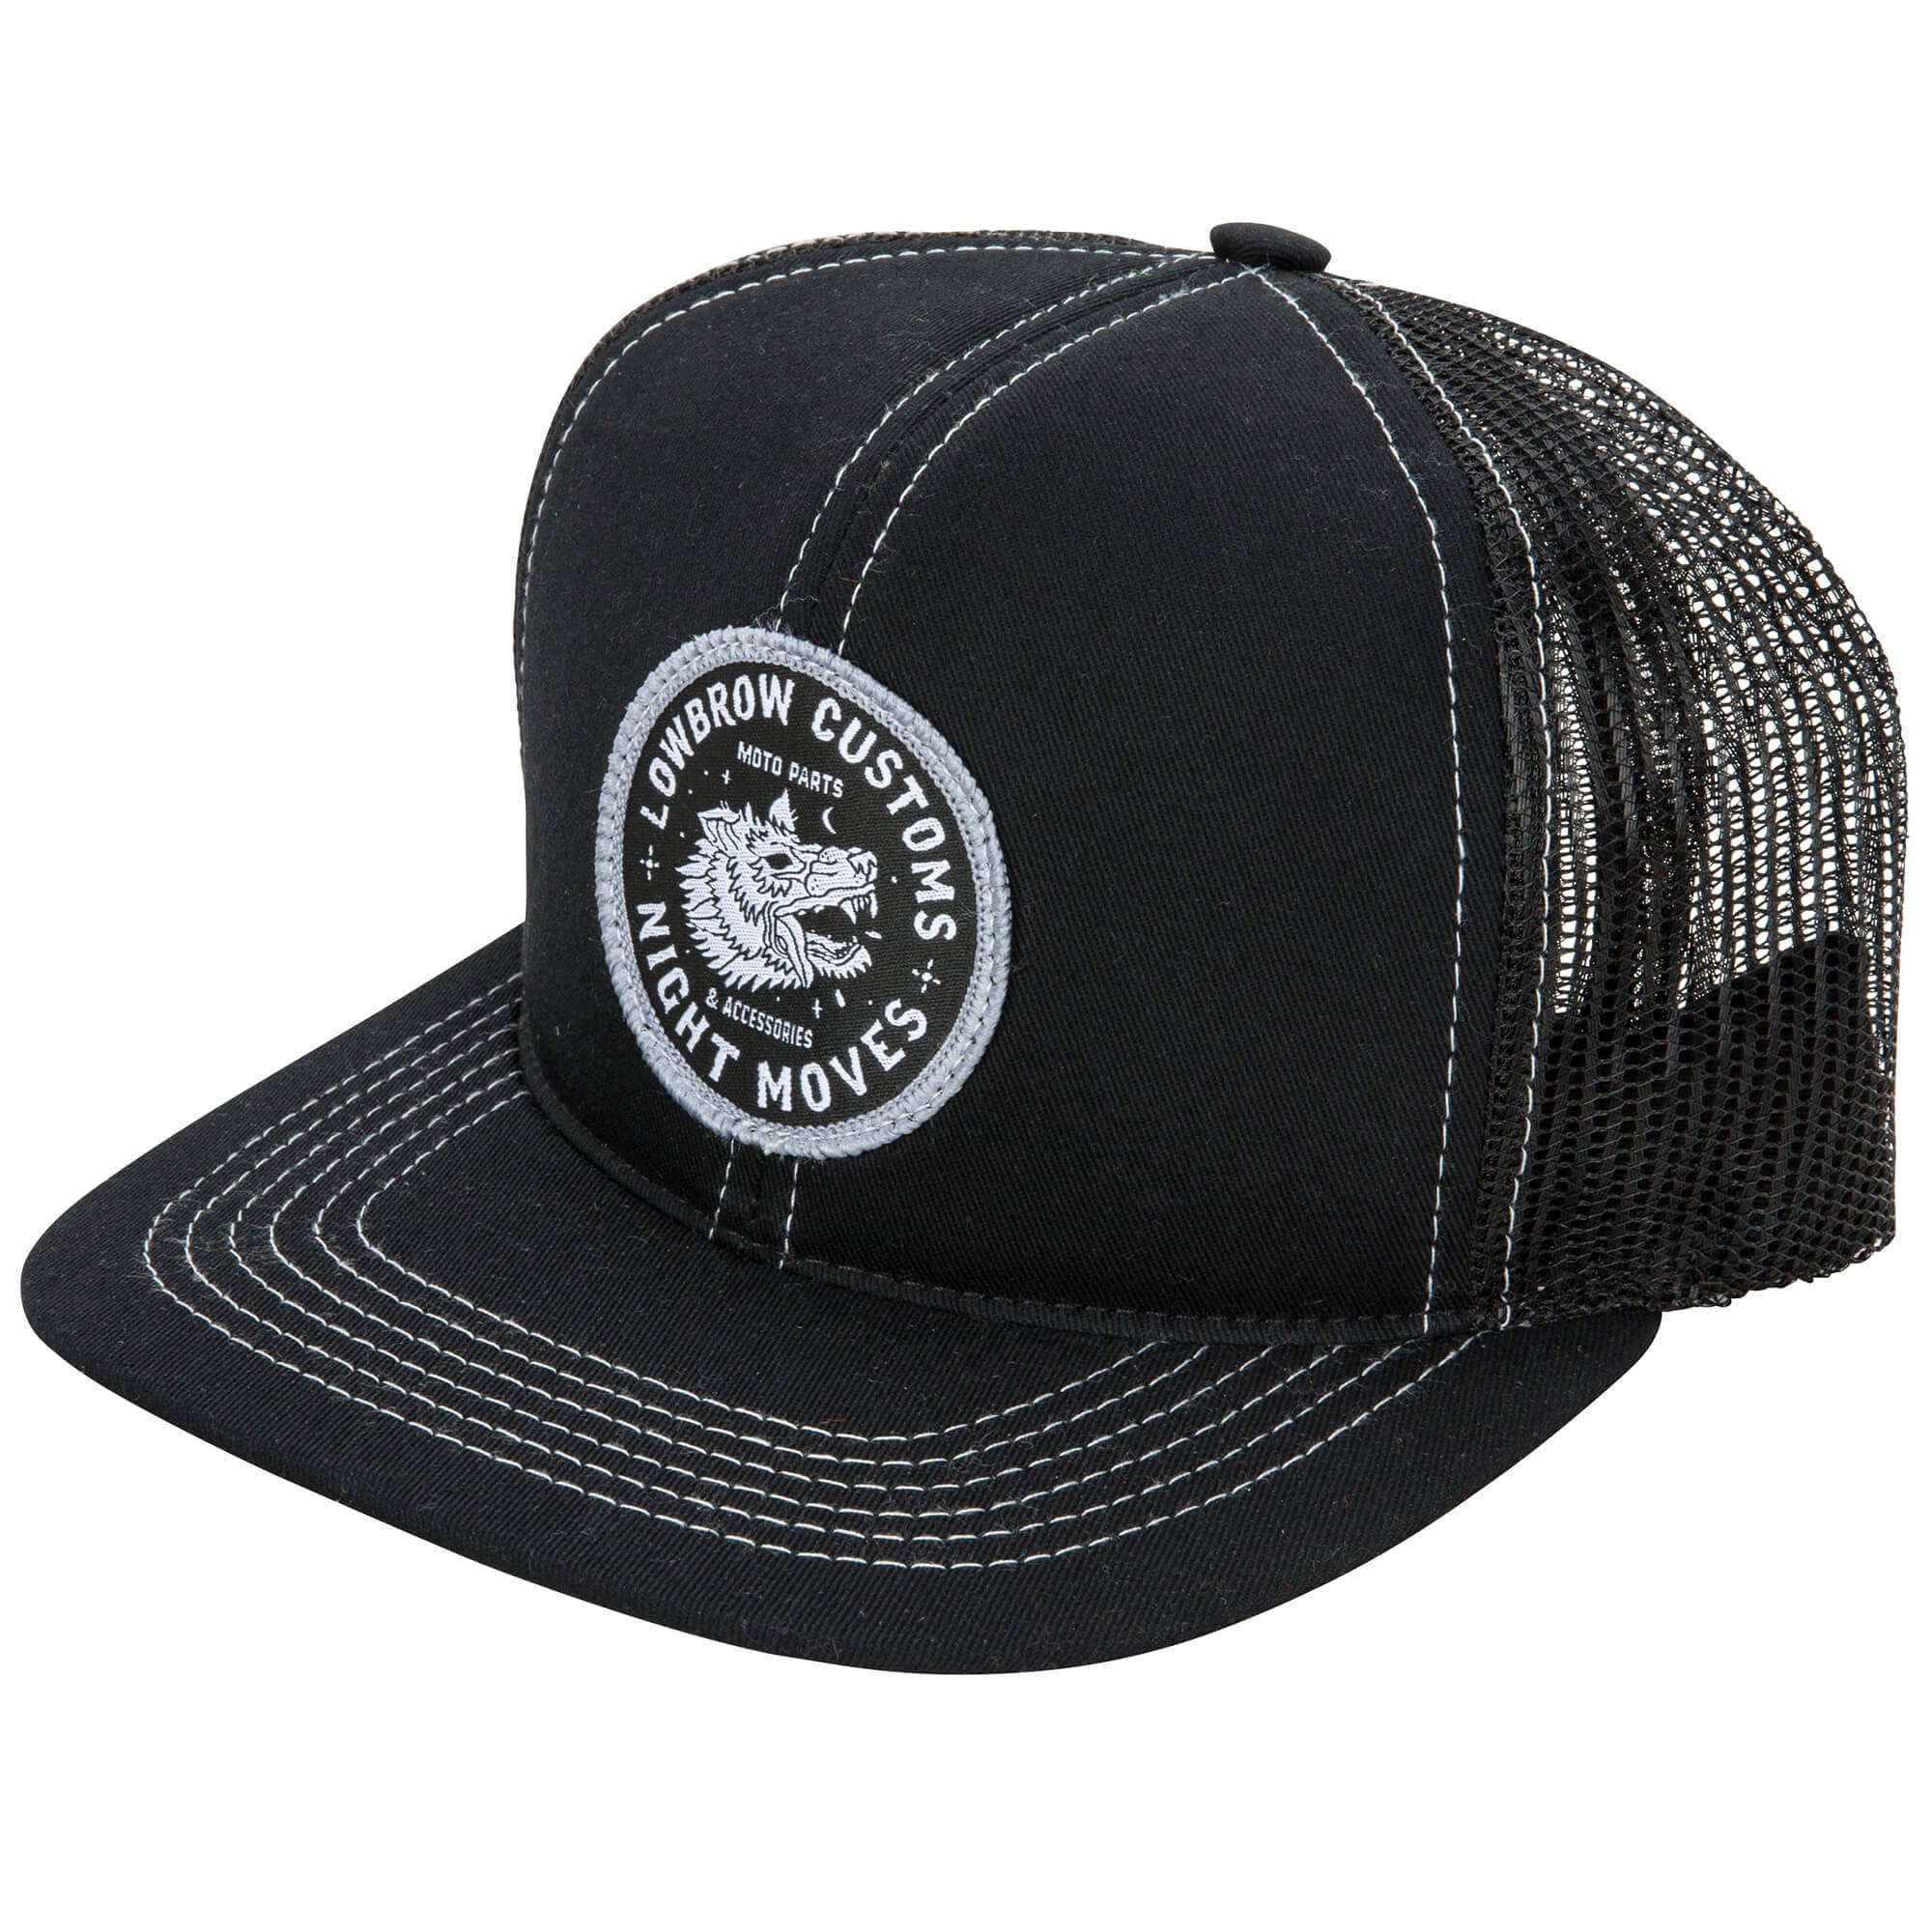 Lowbrow Customs Night Moves Premium Snap Back Hat - USA Made